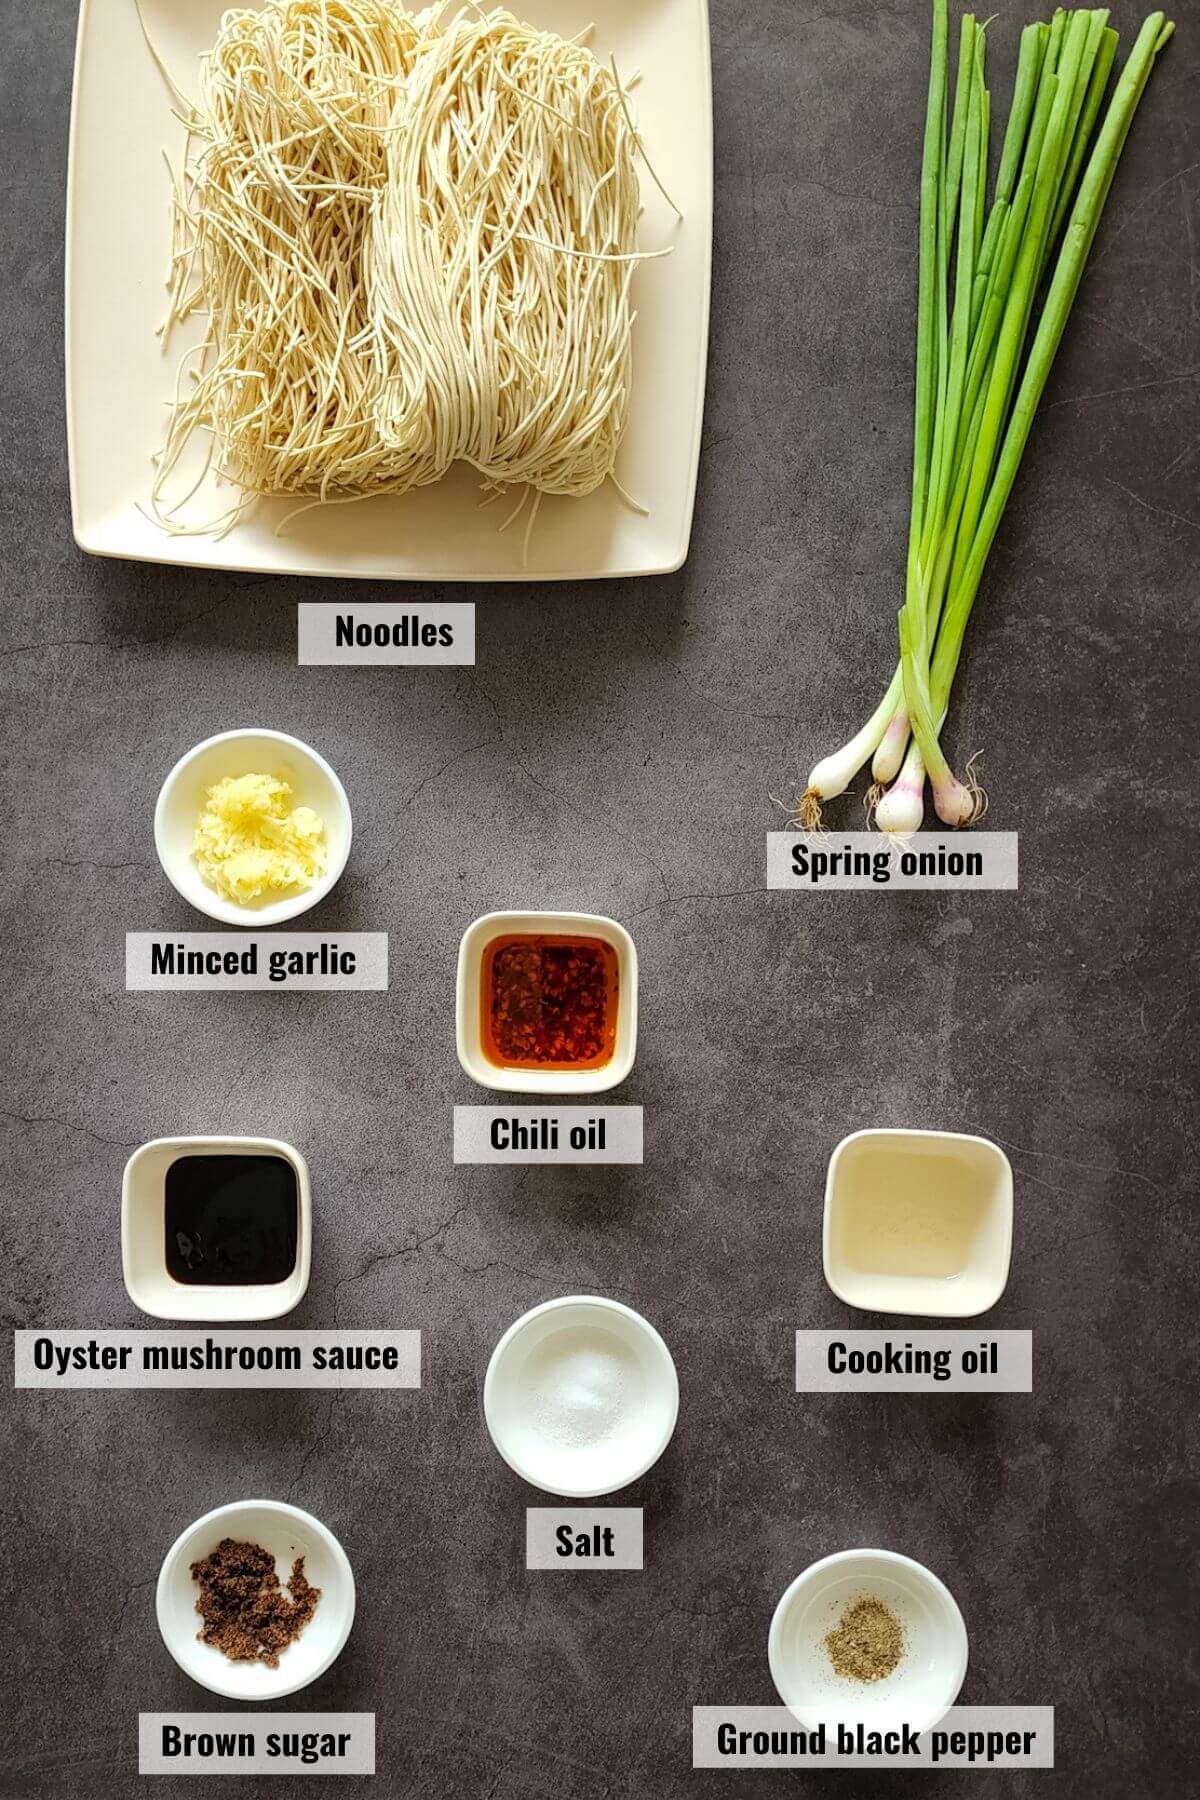 Ingredients for garlic chili oil noodles, labelled.